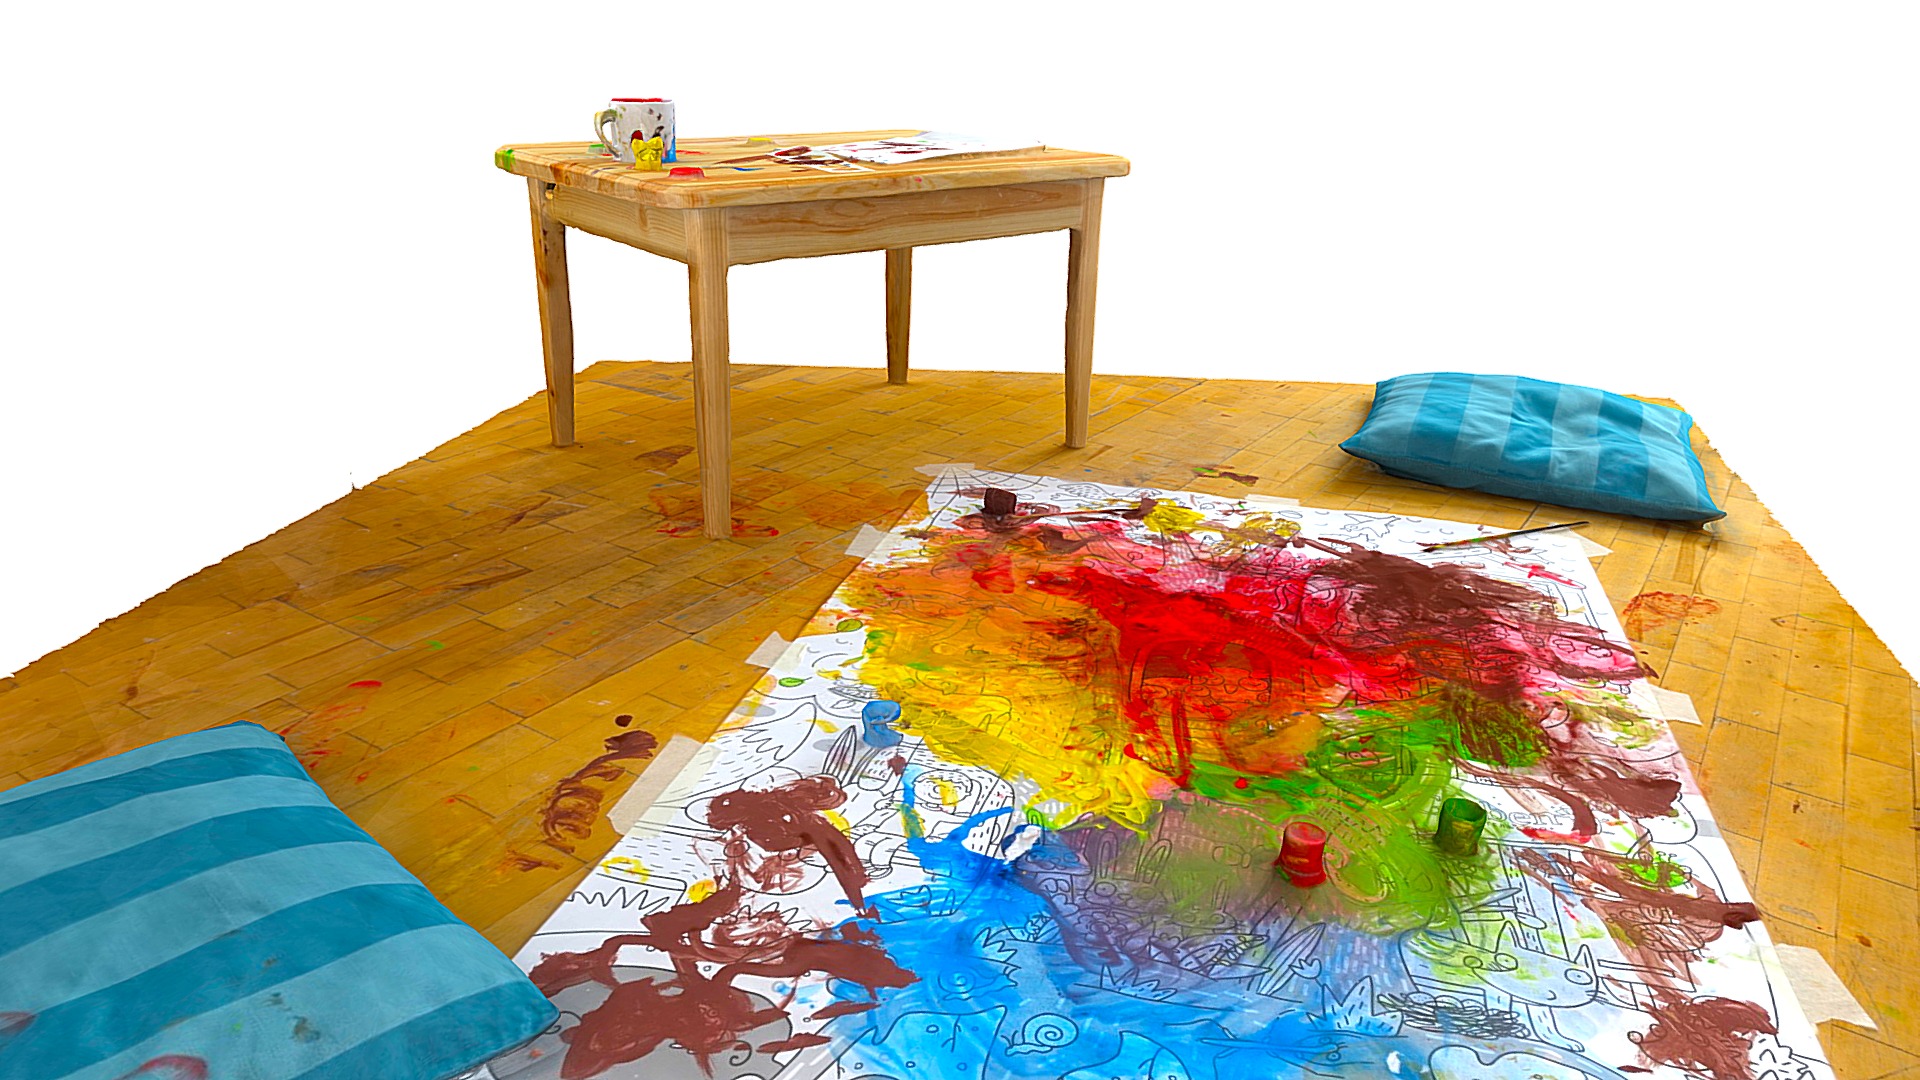 3D model Art - This is a 3D model of the Art. The 3D model is about a table with a blanket on it.